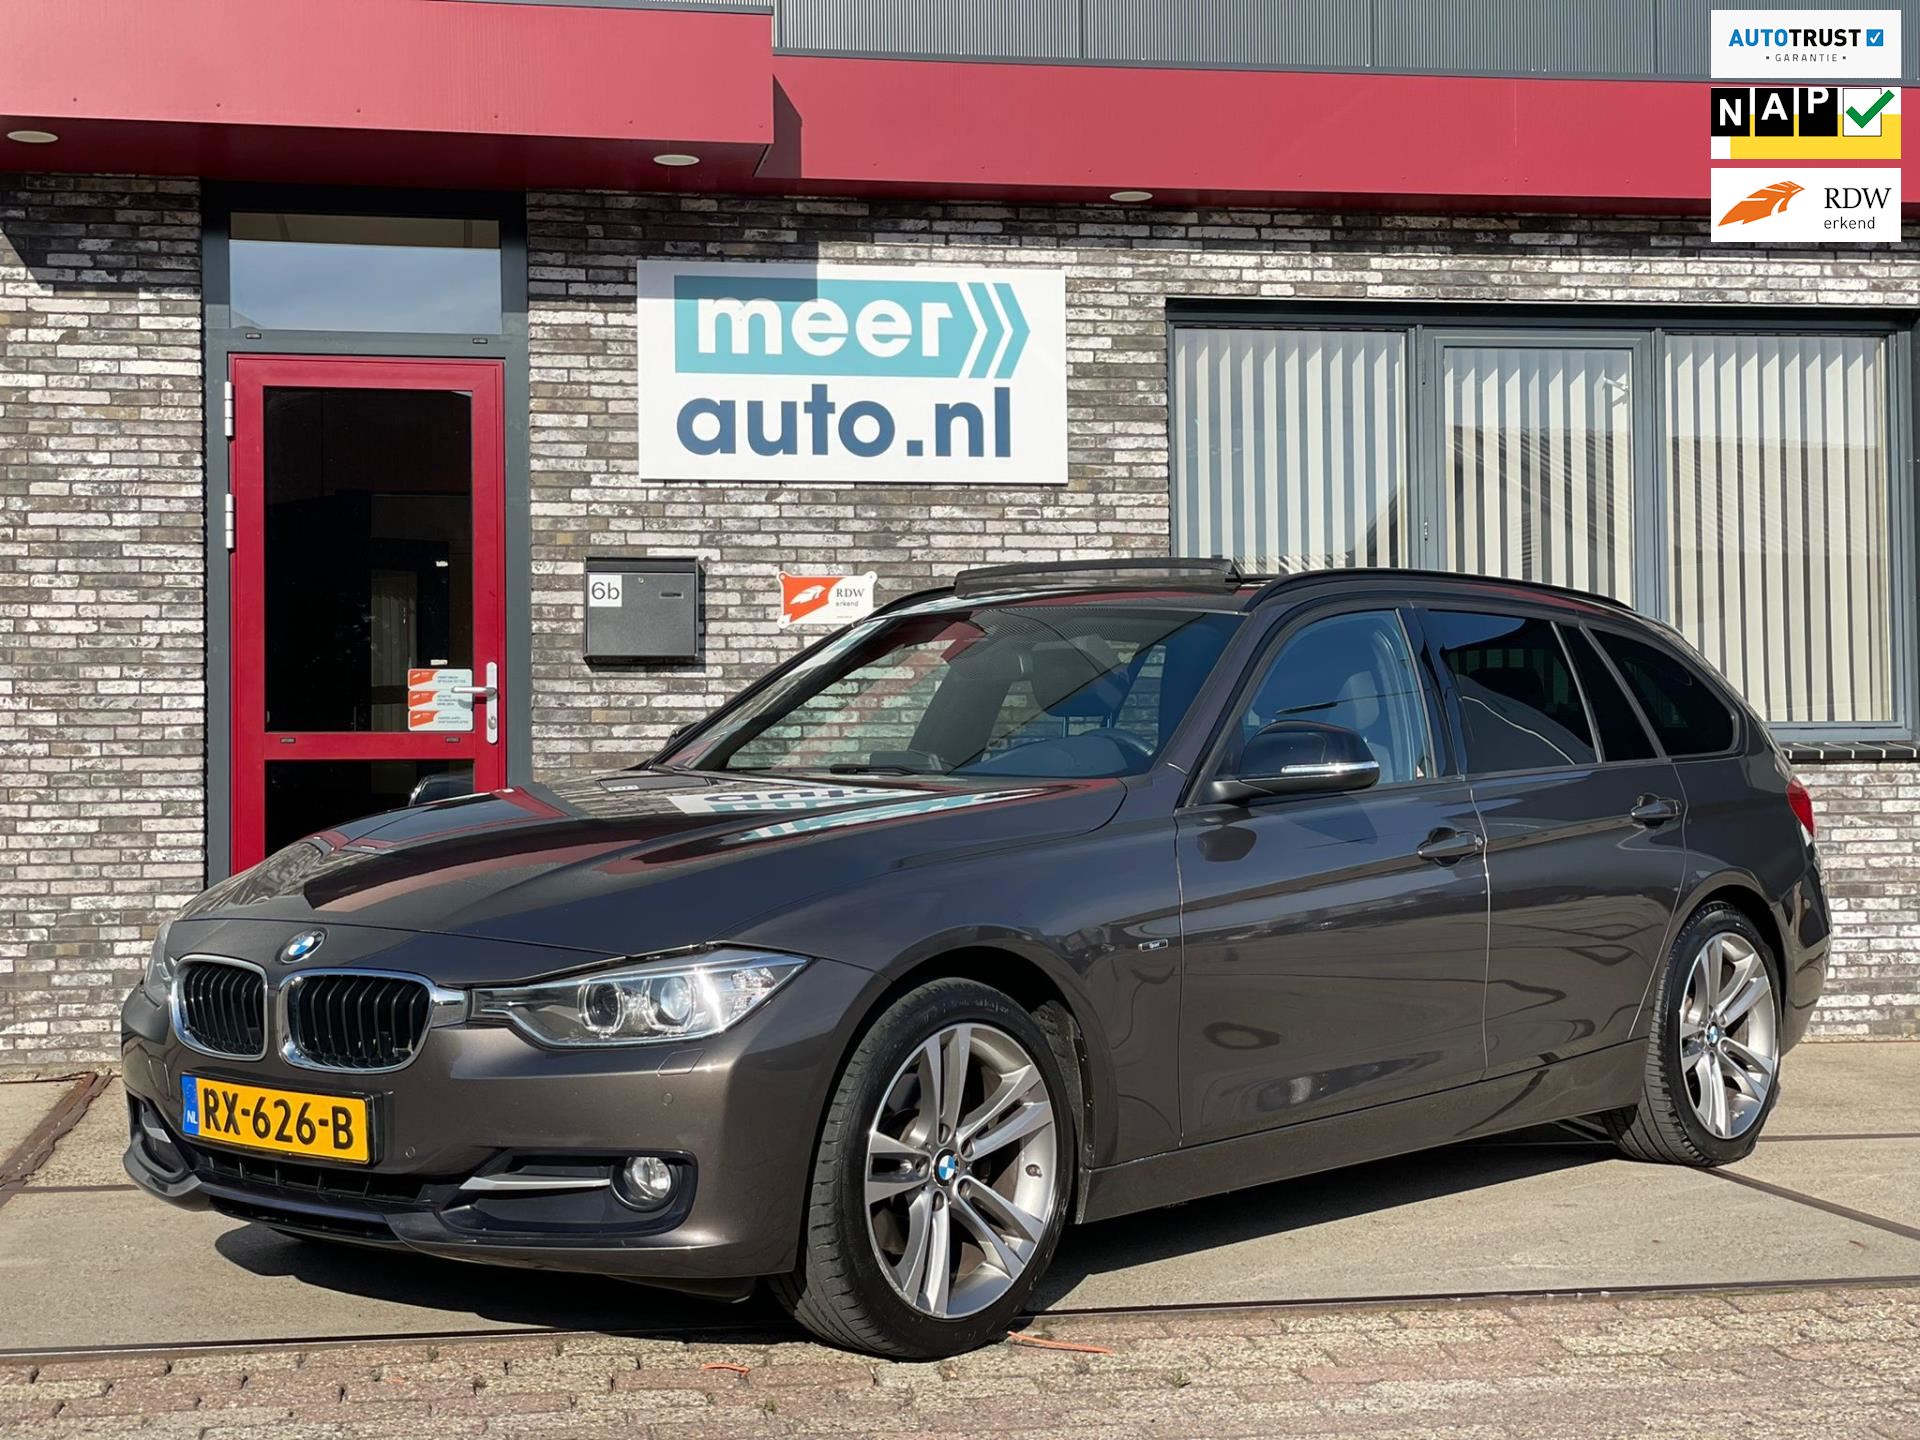 BMW 3-serie Touring occasion - Meerauto.nl